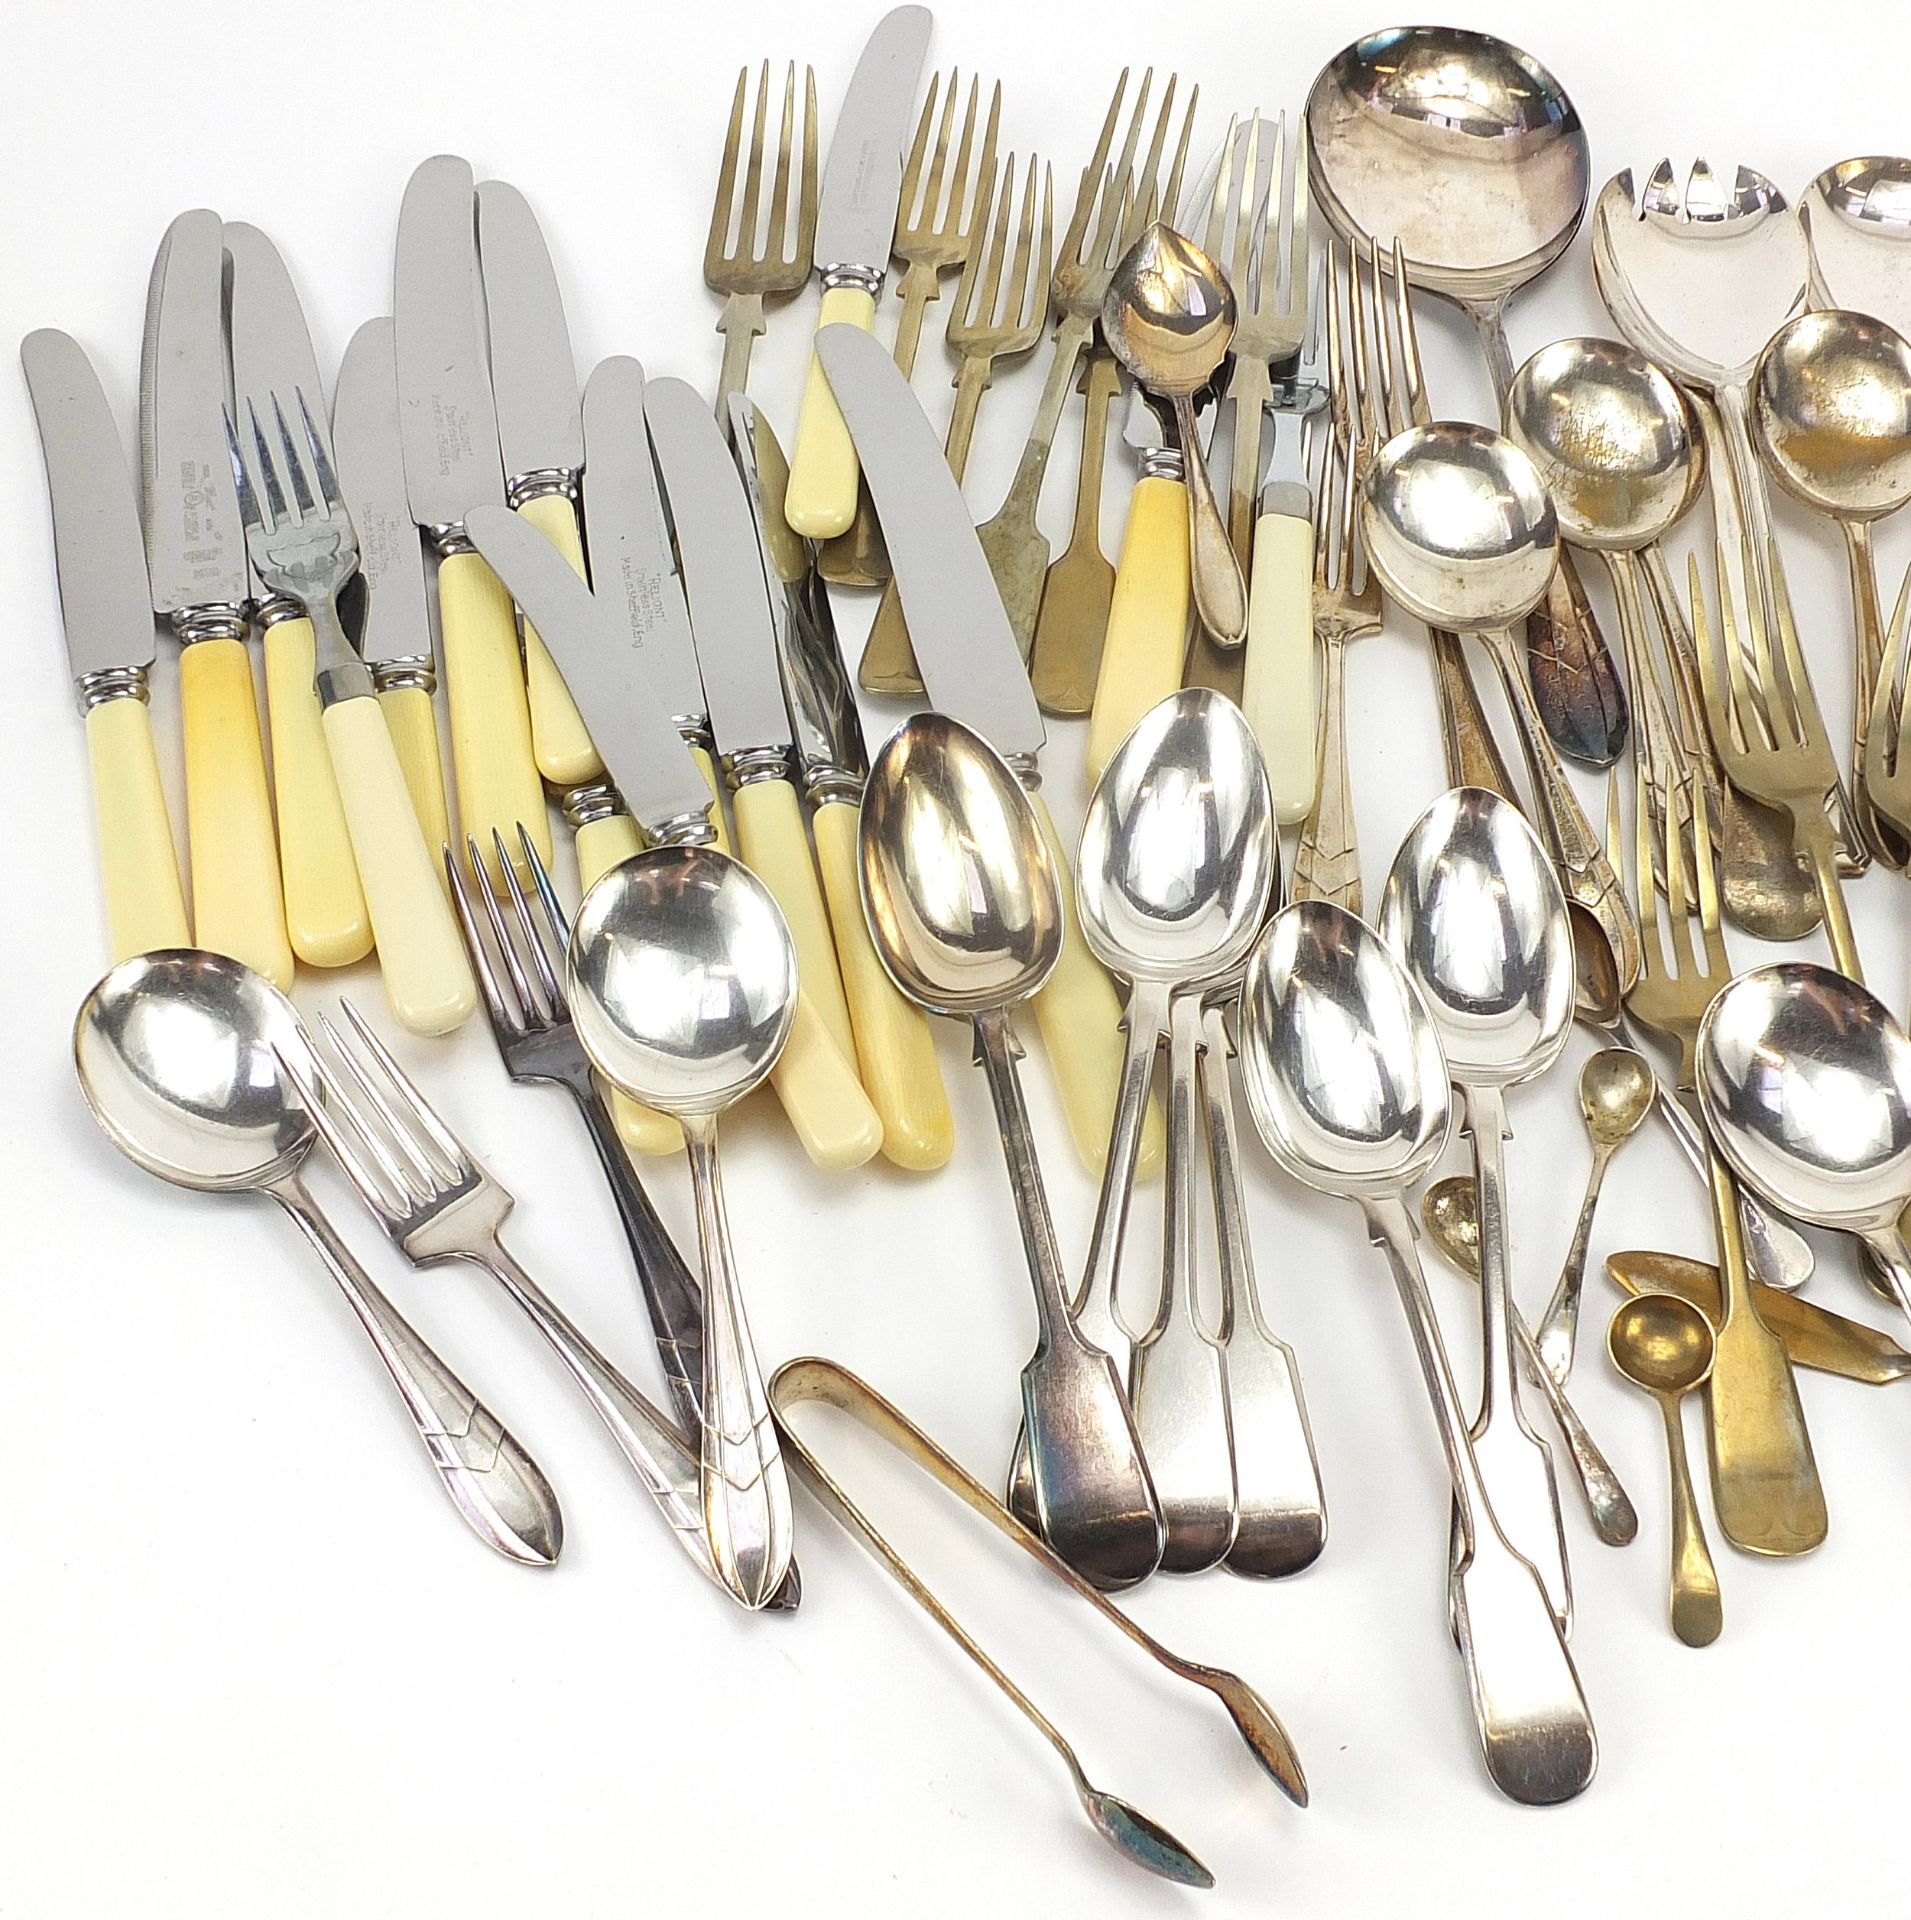 Silver plated and stainless steel cutlery, some with ivorine handles and a pair of silver sugar ton - Image 2 of 3